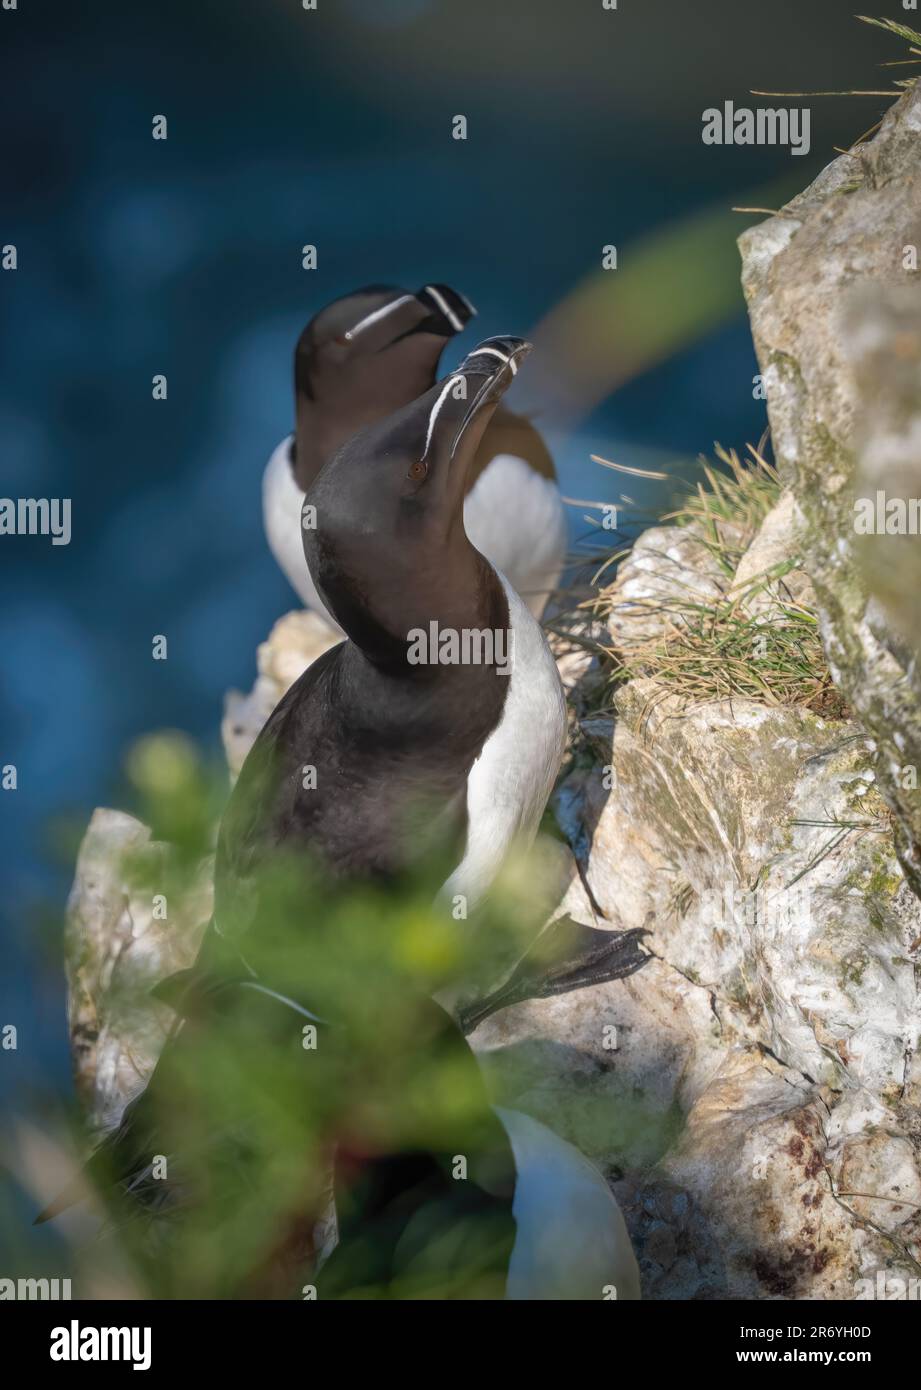 A breeding pair of Razorbills, (Alca torda), perched on the edge of a cliff at Bempton, Yorkshire, UK Stock Photo